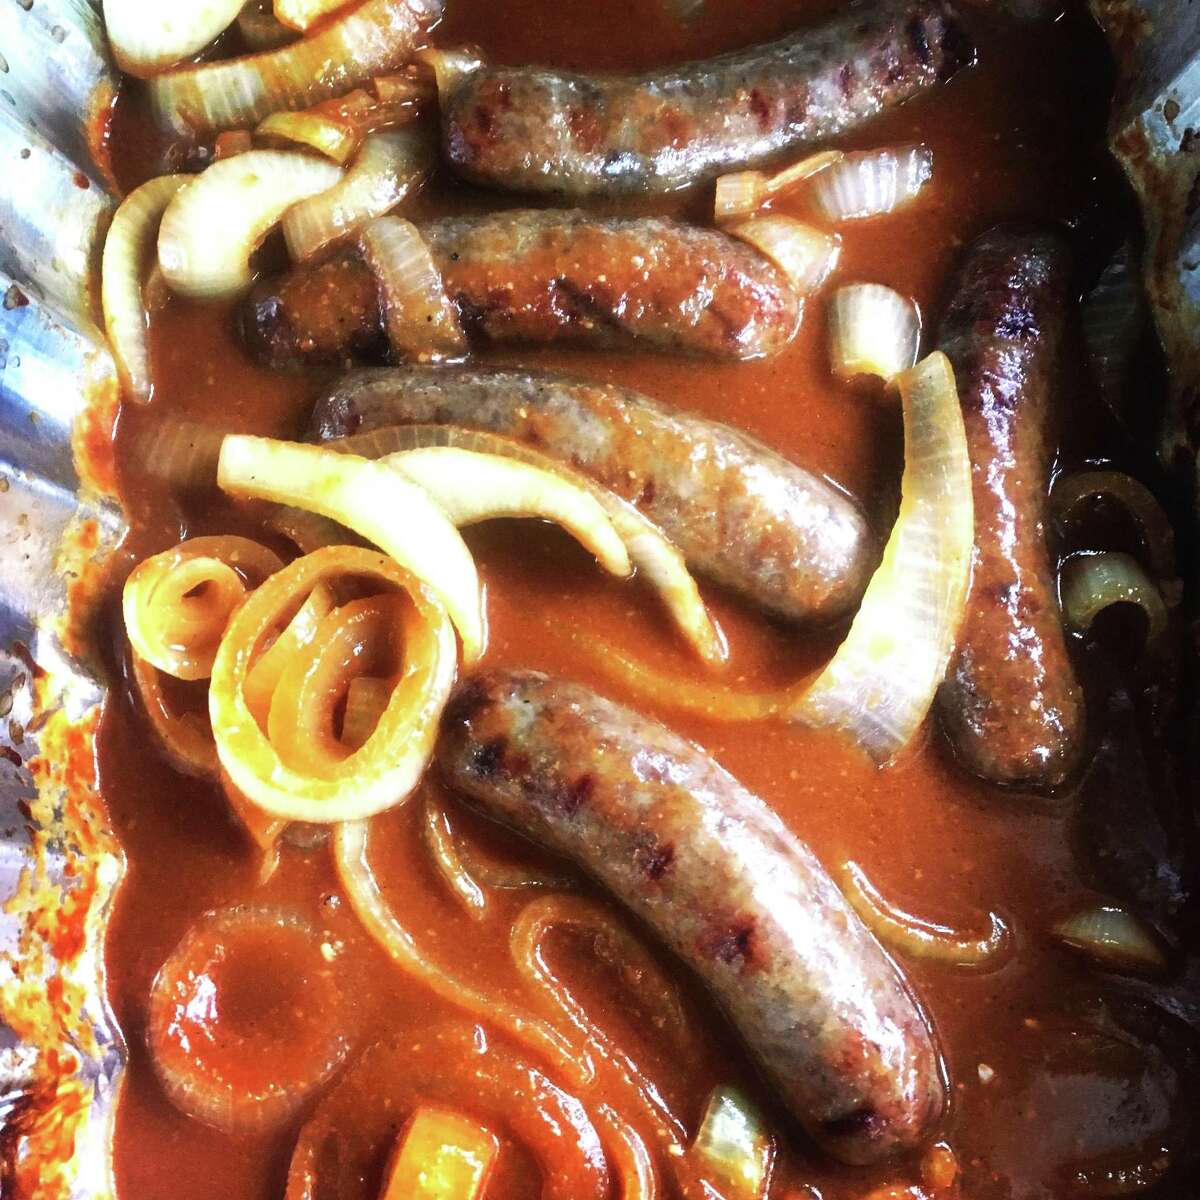 The Wisconsin brat tub combines grilled bratwursts with a simmering mixture of beer, barbecue sauce, mustard, onions and hot sauce.